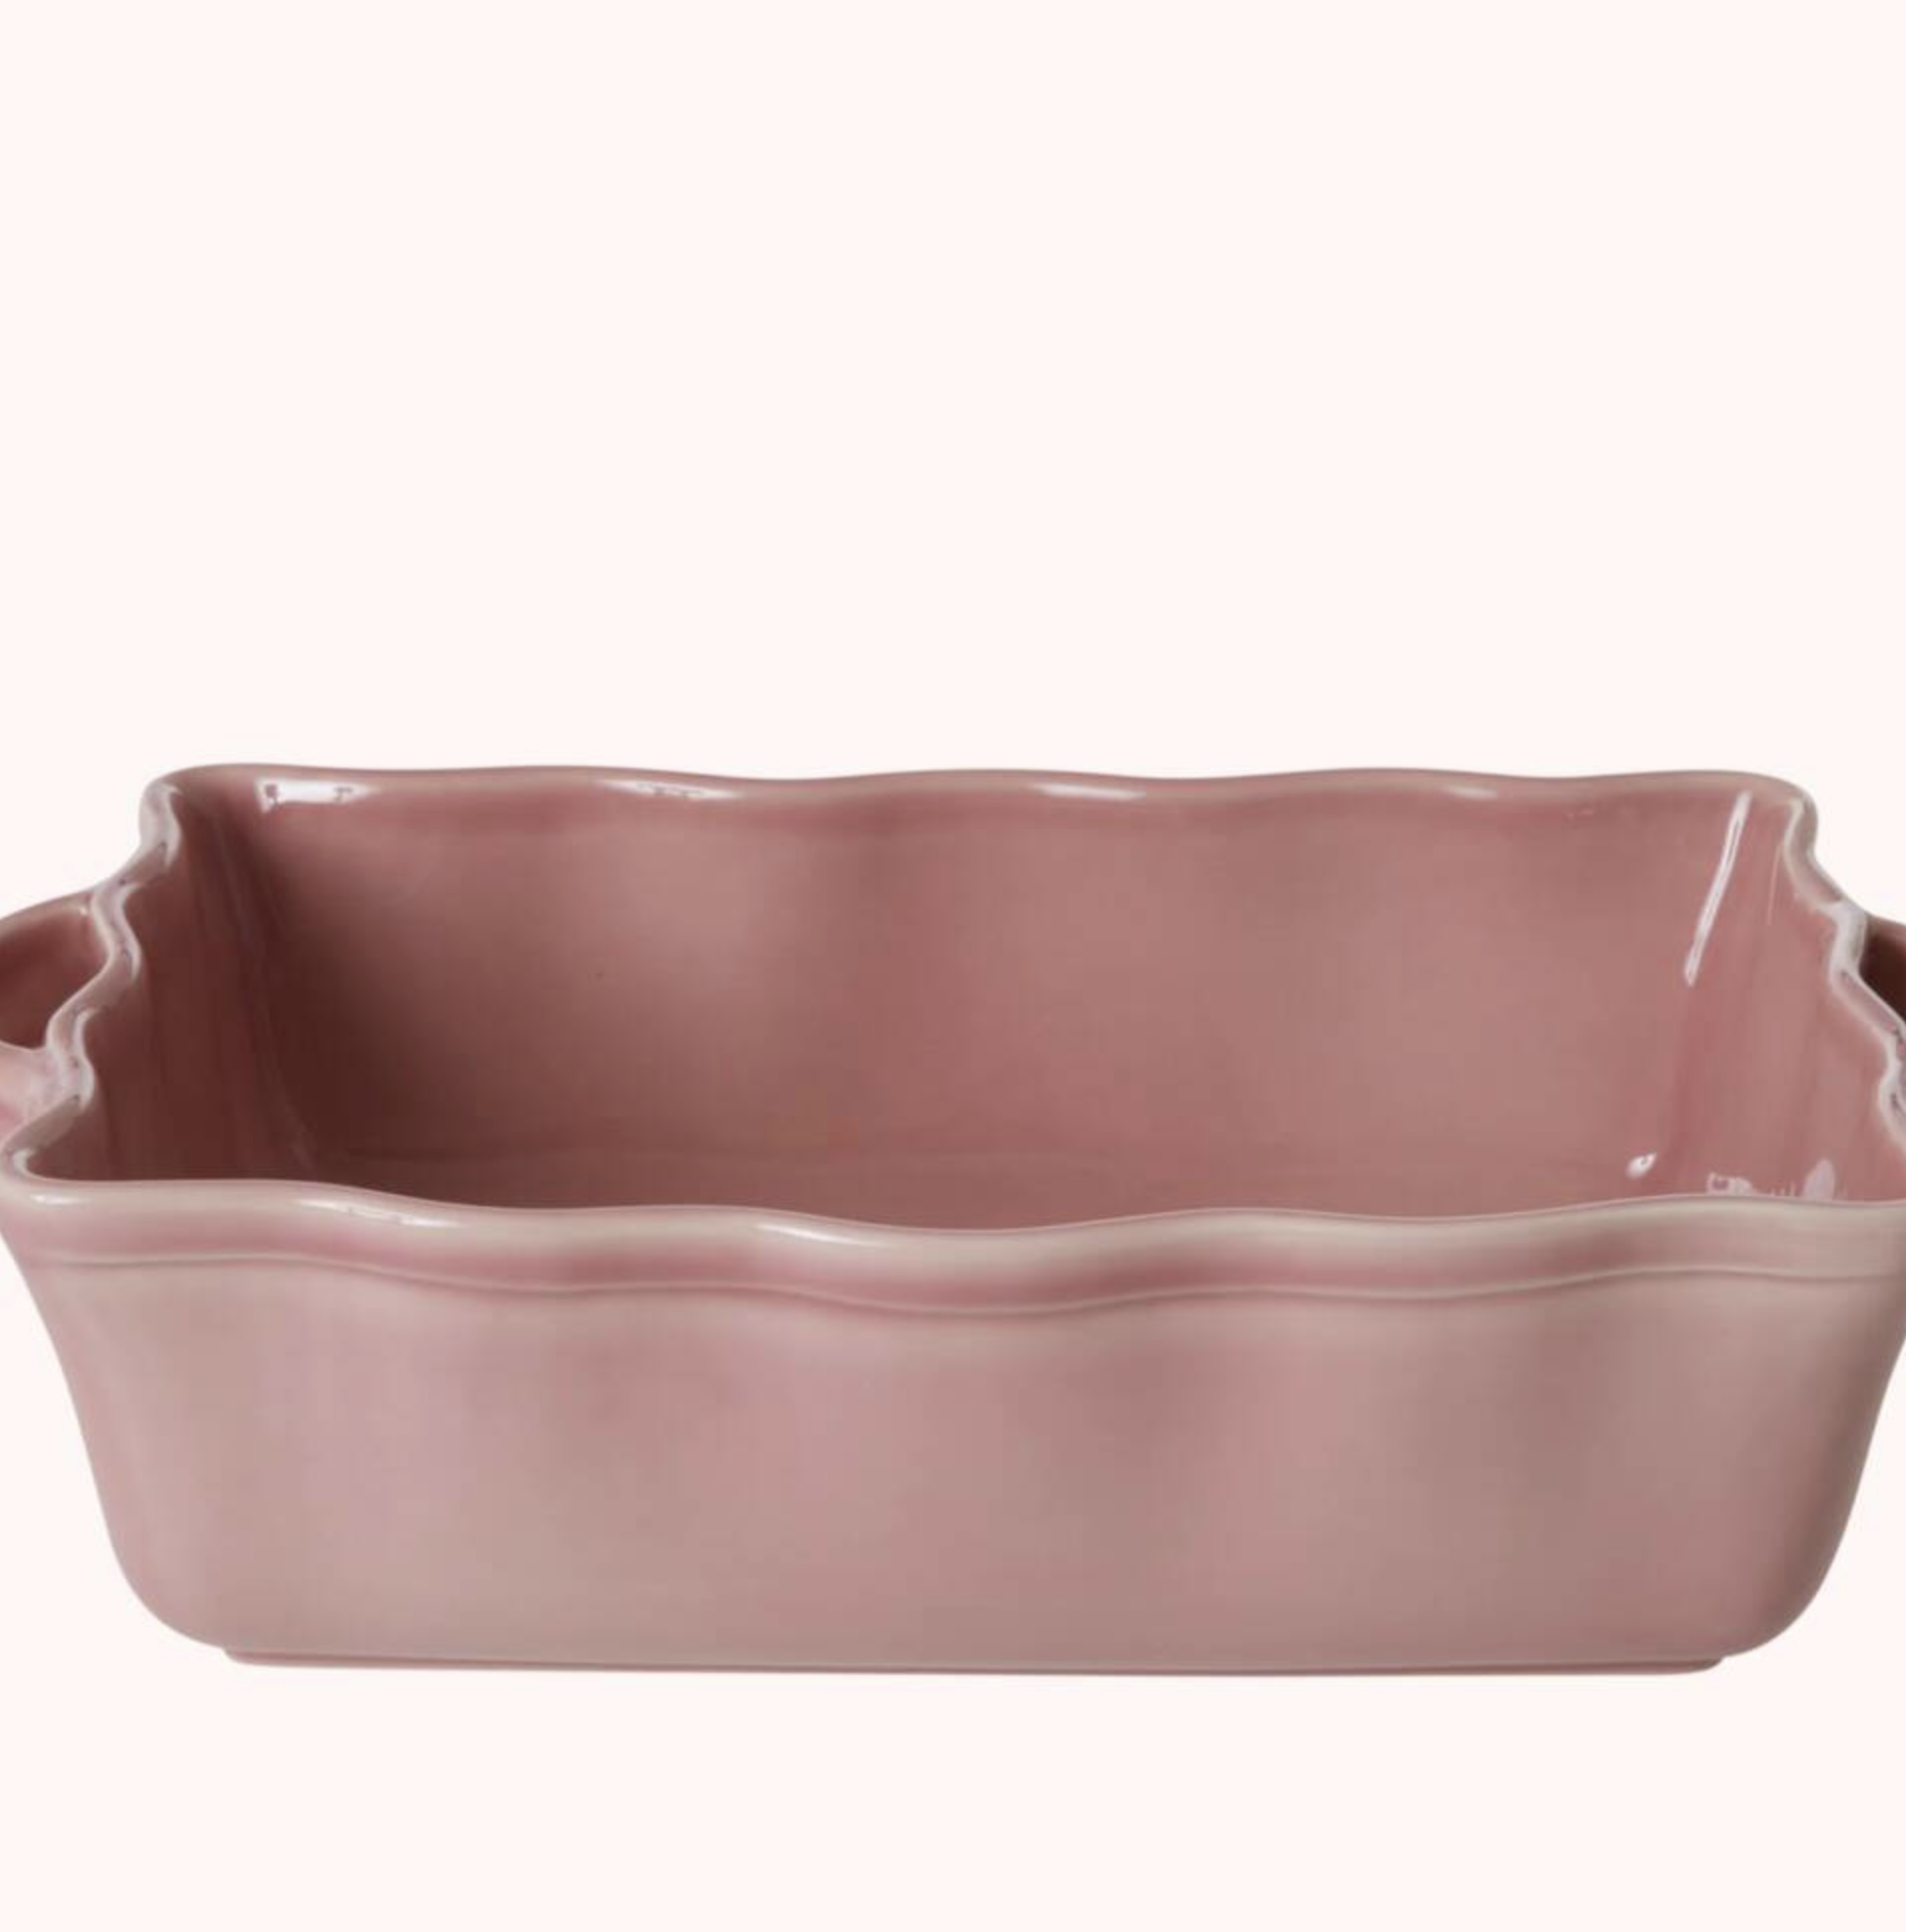 Rice by Rice Pink fluted Oven to Table Dish